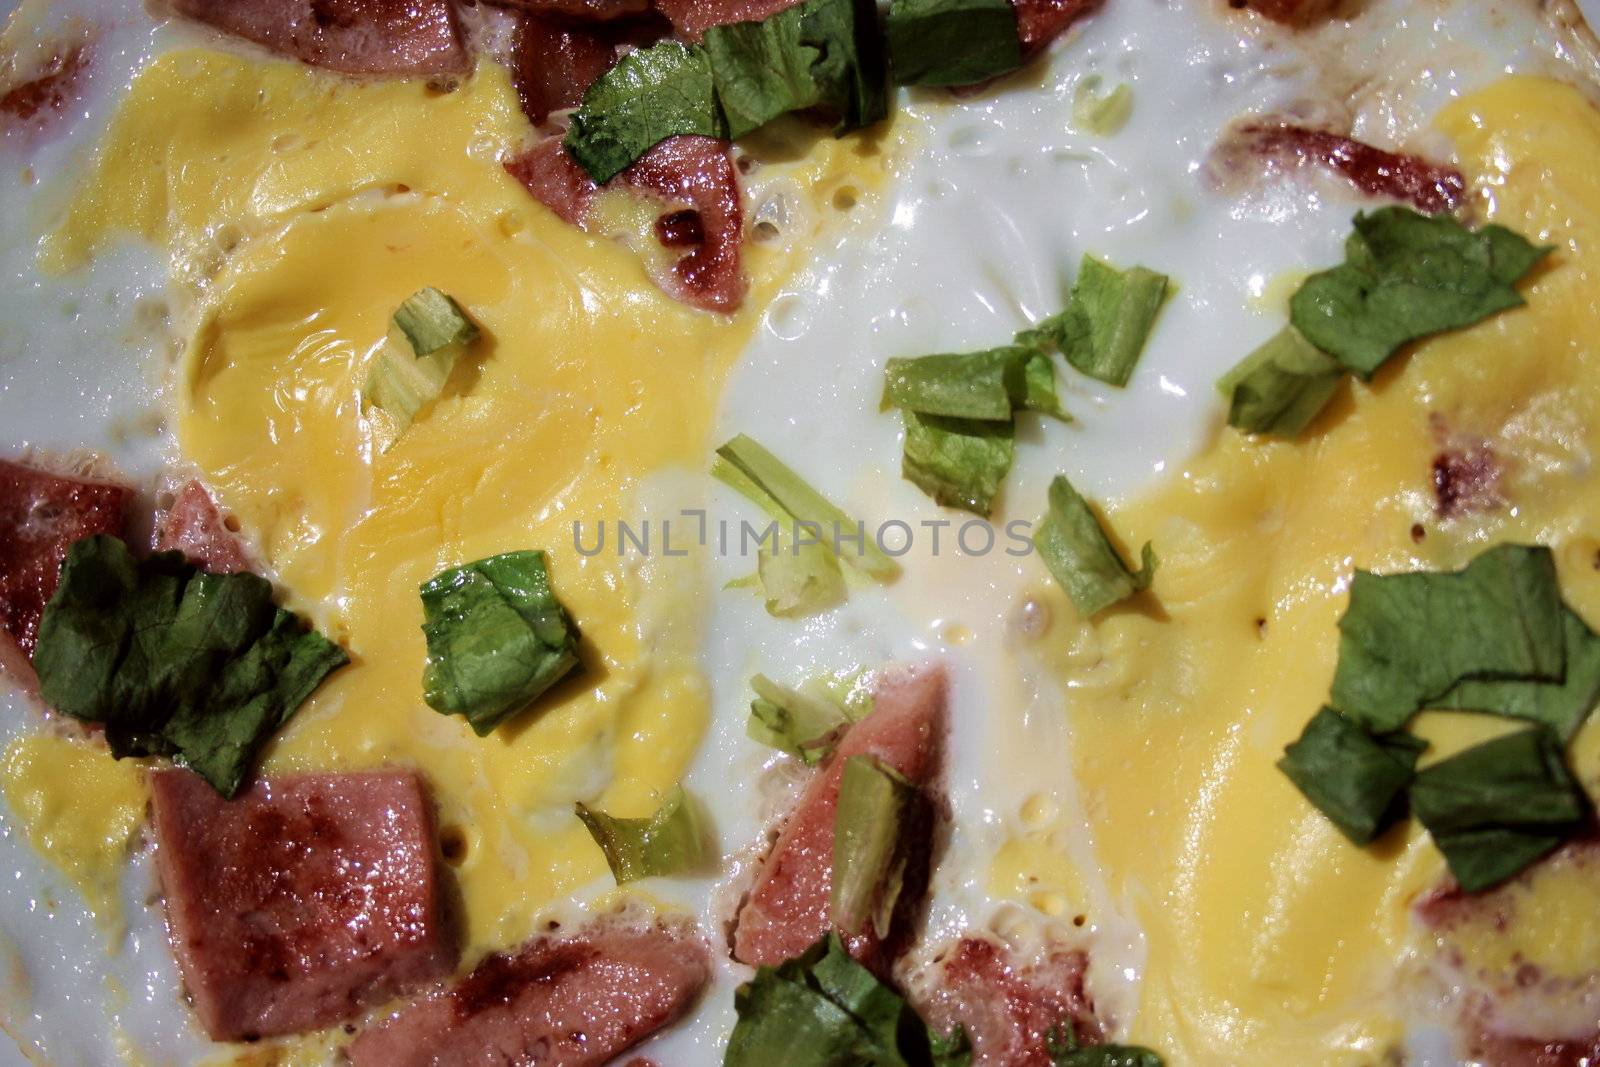 Series of the textures (omelet with wurst and greens 2) 